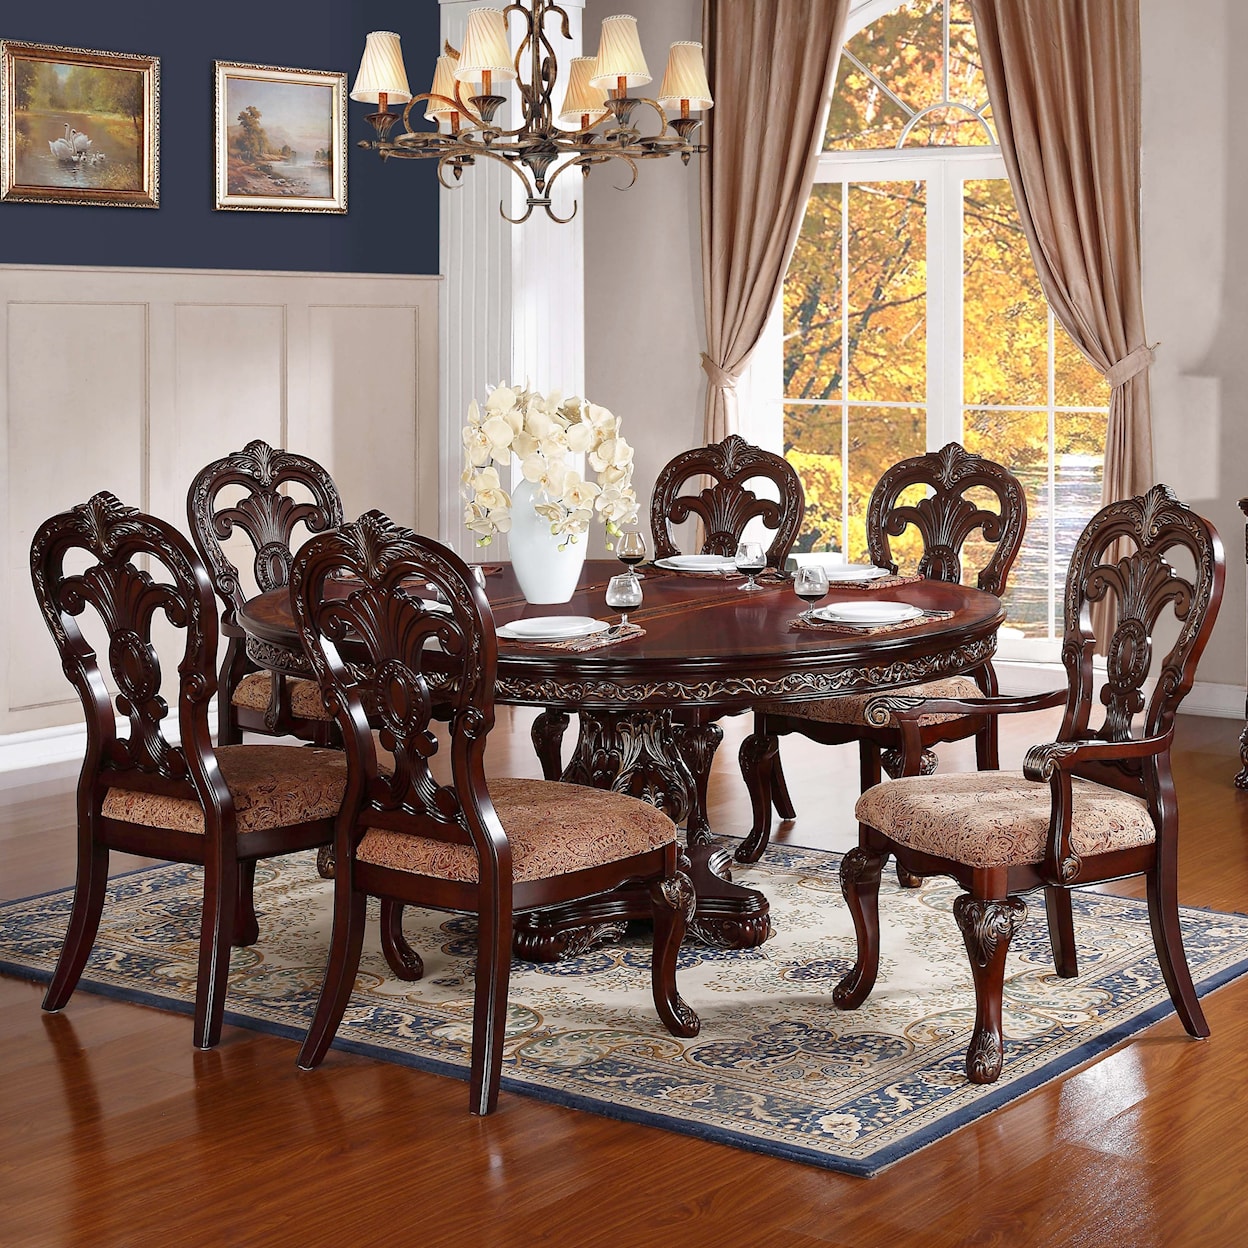 Homelegance Furniture Deryn Park Dining Table and Chair Set